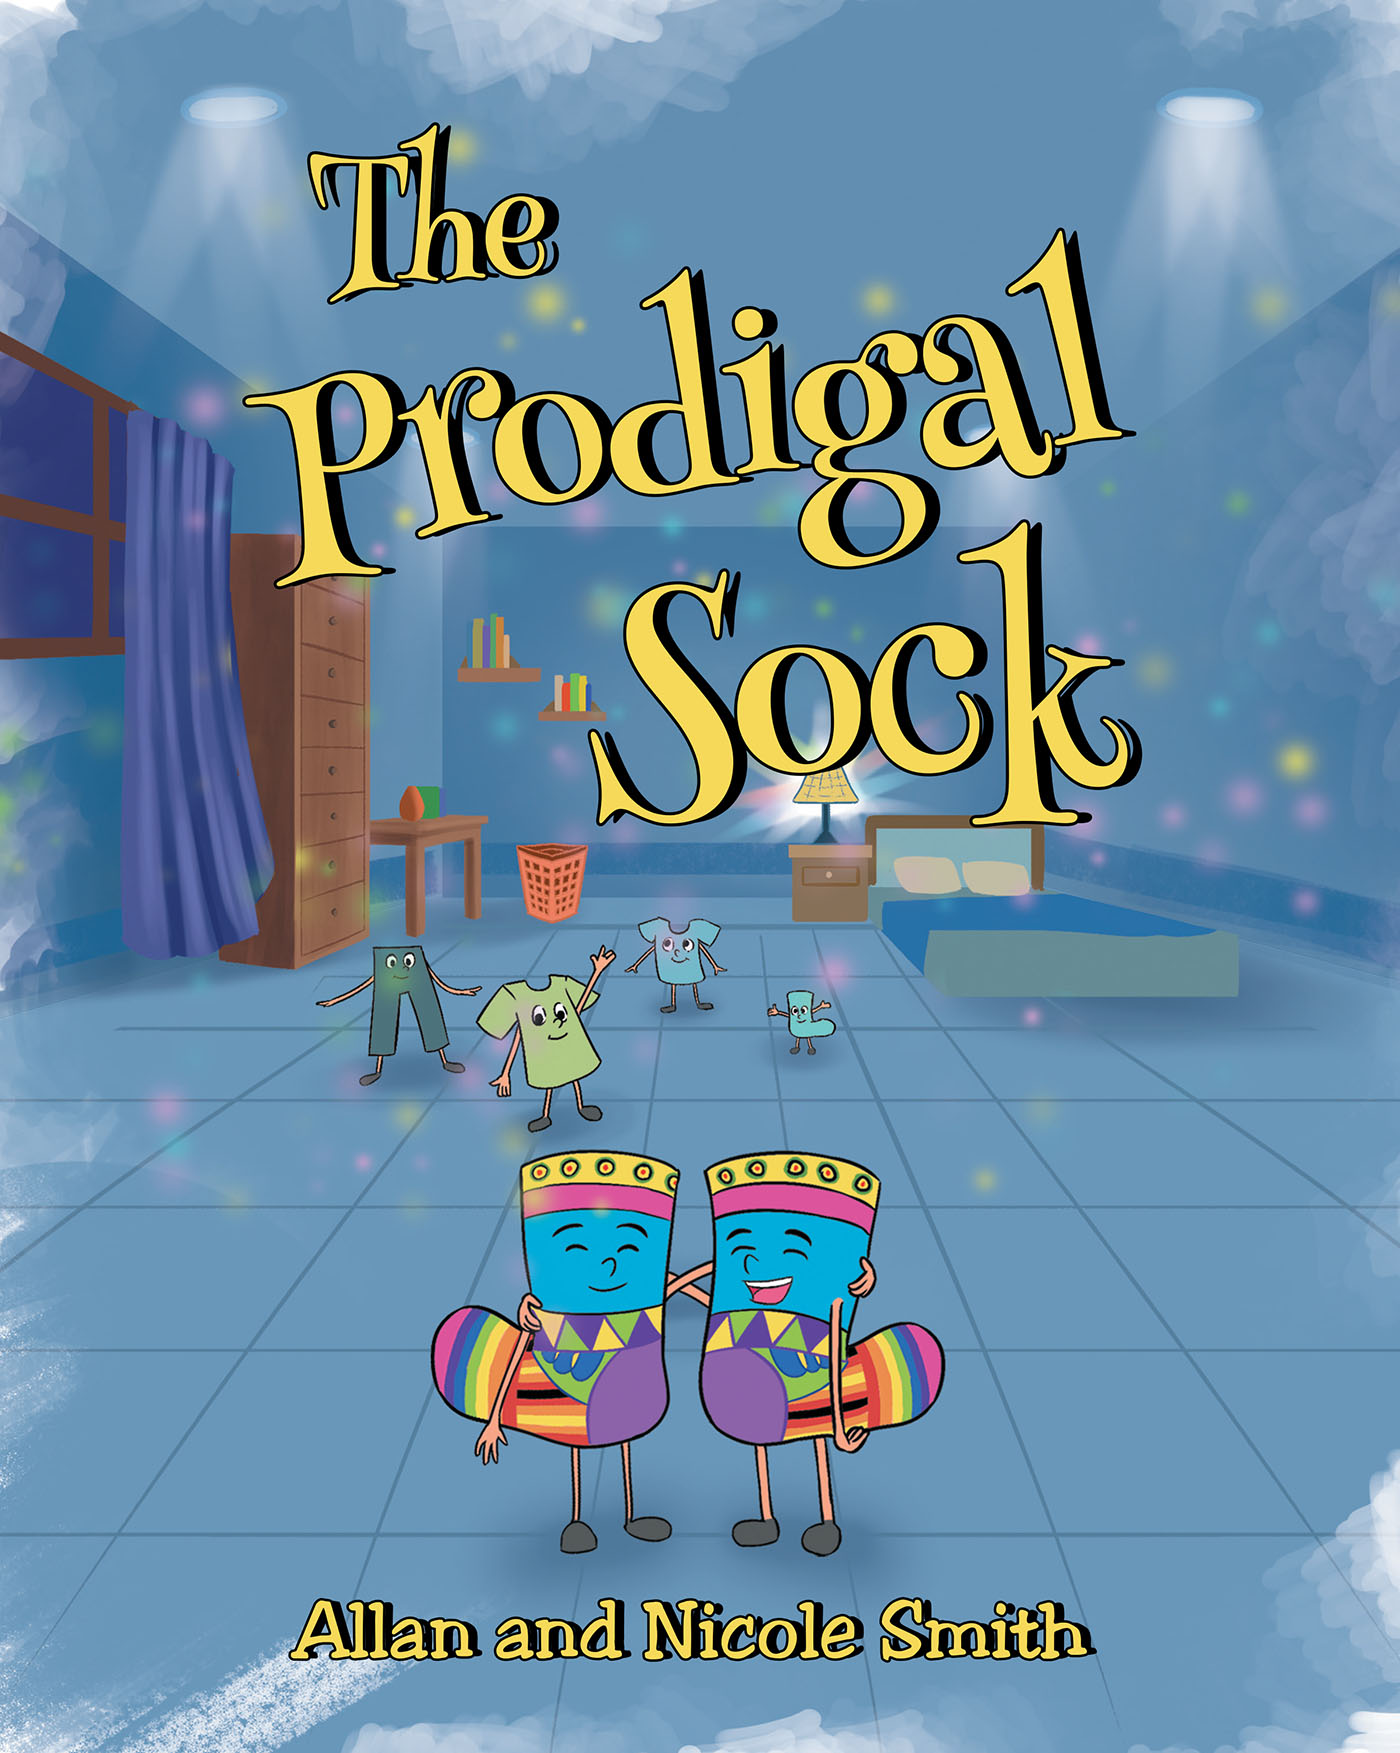 Allan and Nicole Smith’s Newly Released "The Prodigal Sock" is a Creative Reimagining of the Lesson Found Within the Story of the Prodigal Son